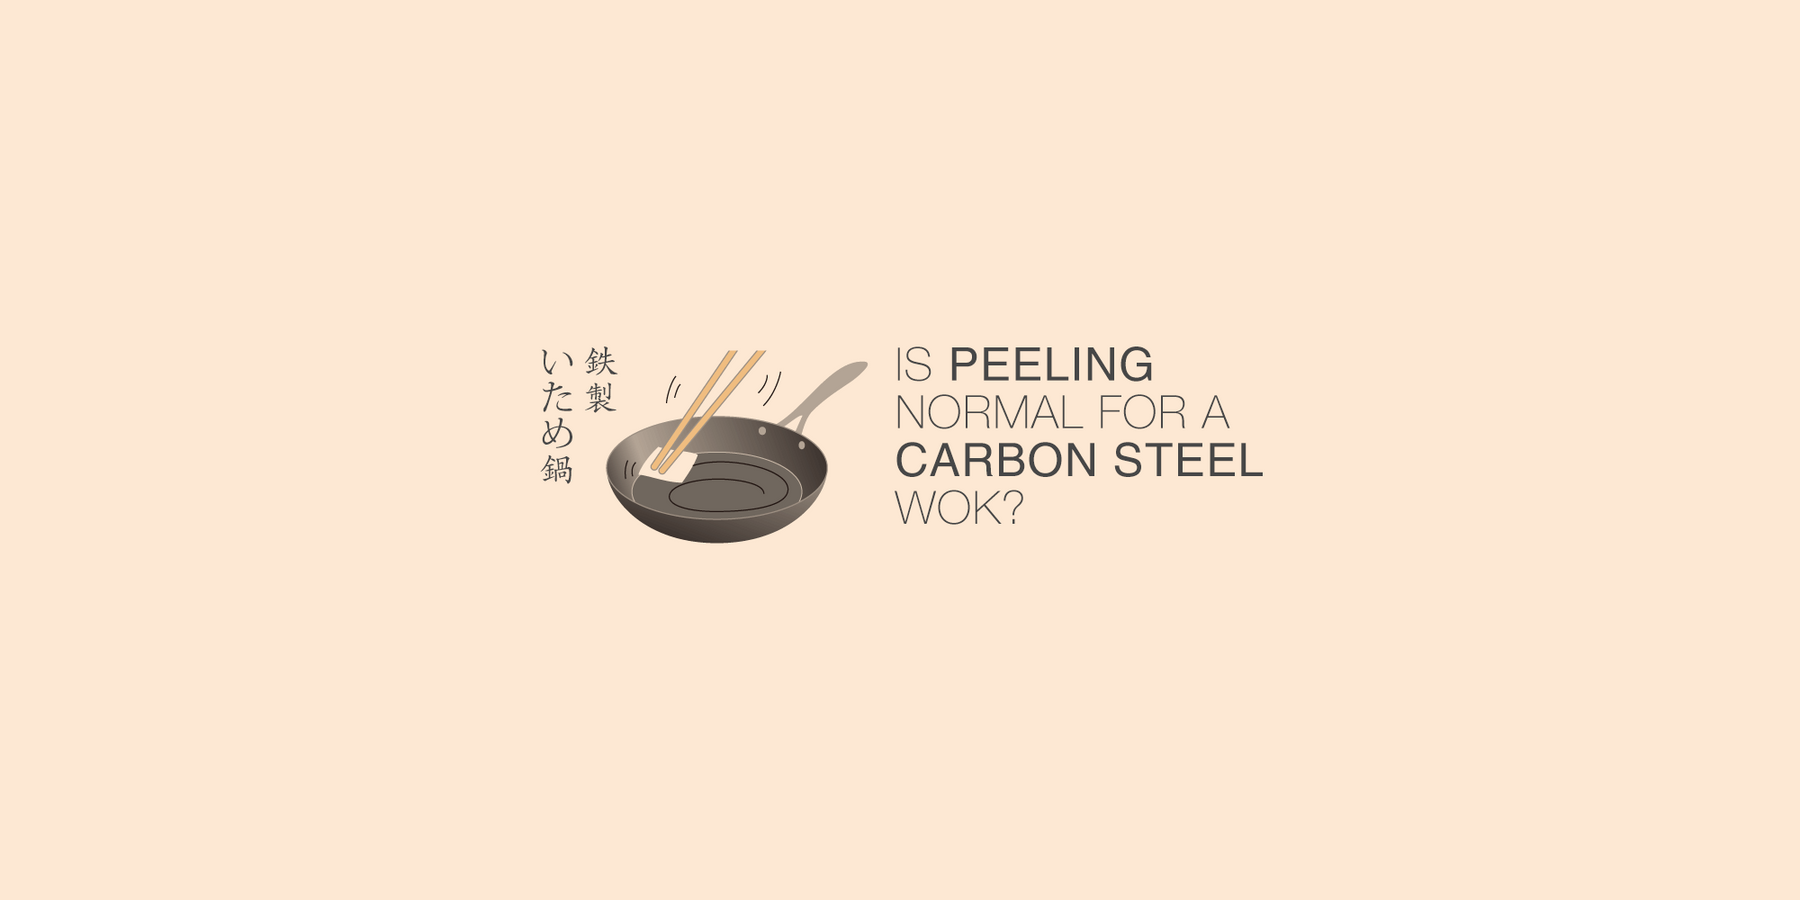 Is peeling normal for a carbon steel wok?